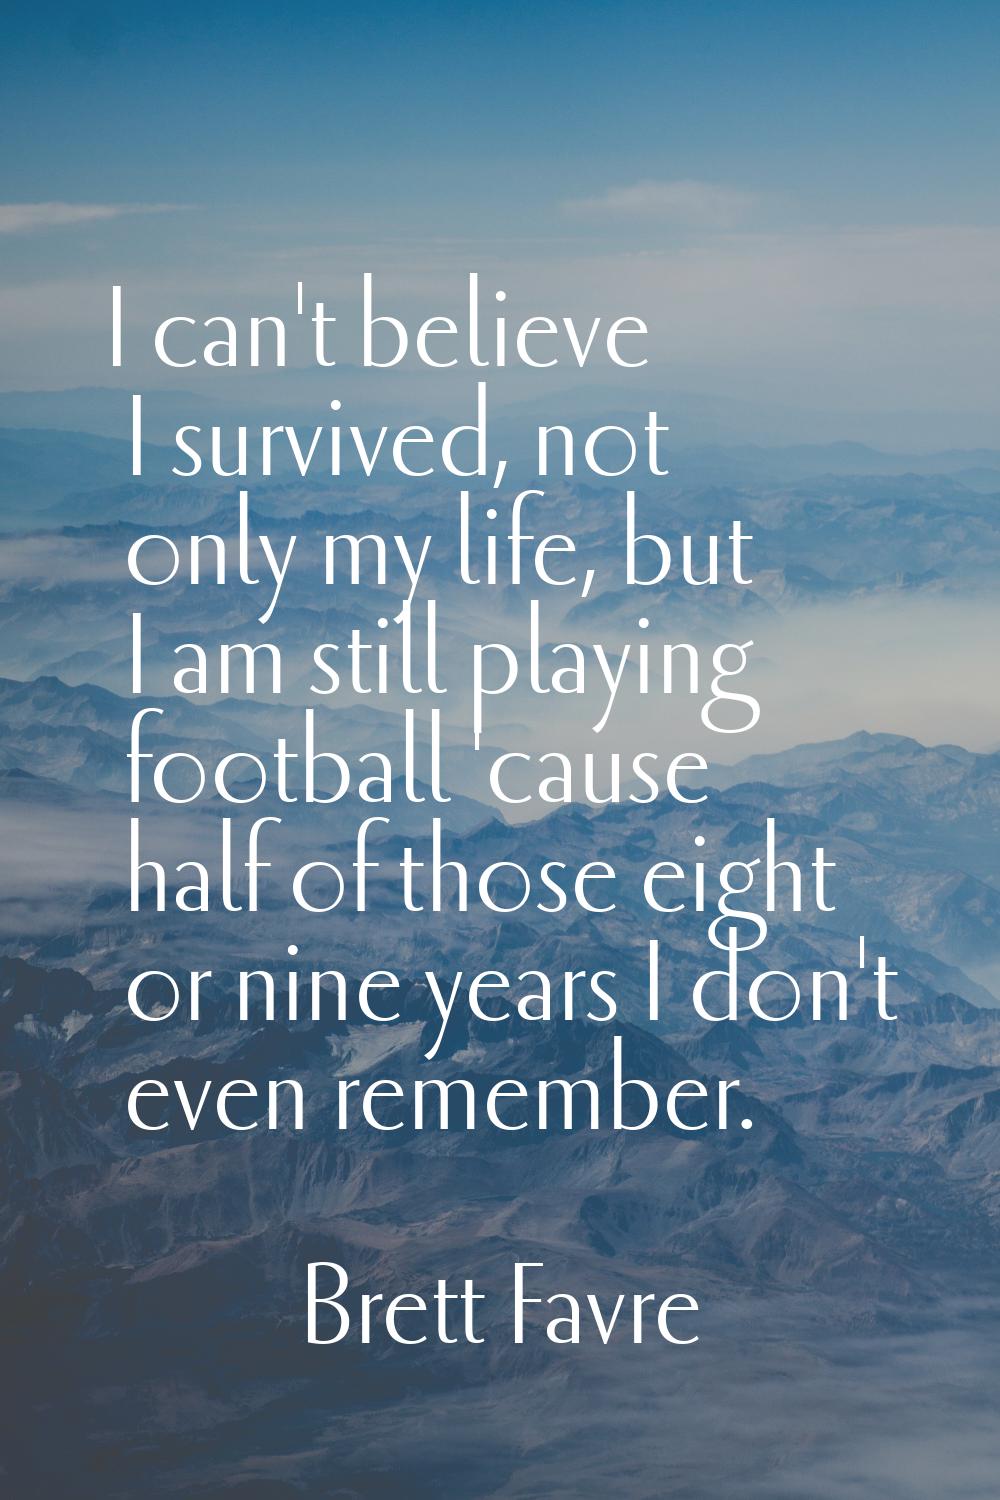 I can't believe I survived, not only my life, but I am still playing football 'cause half of those 